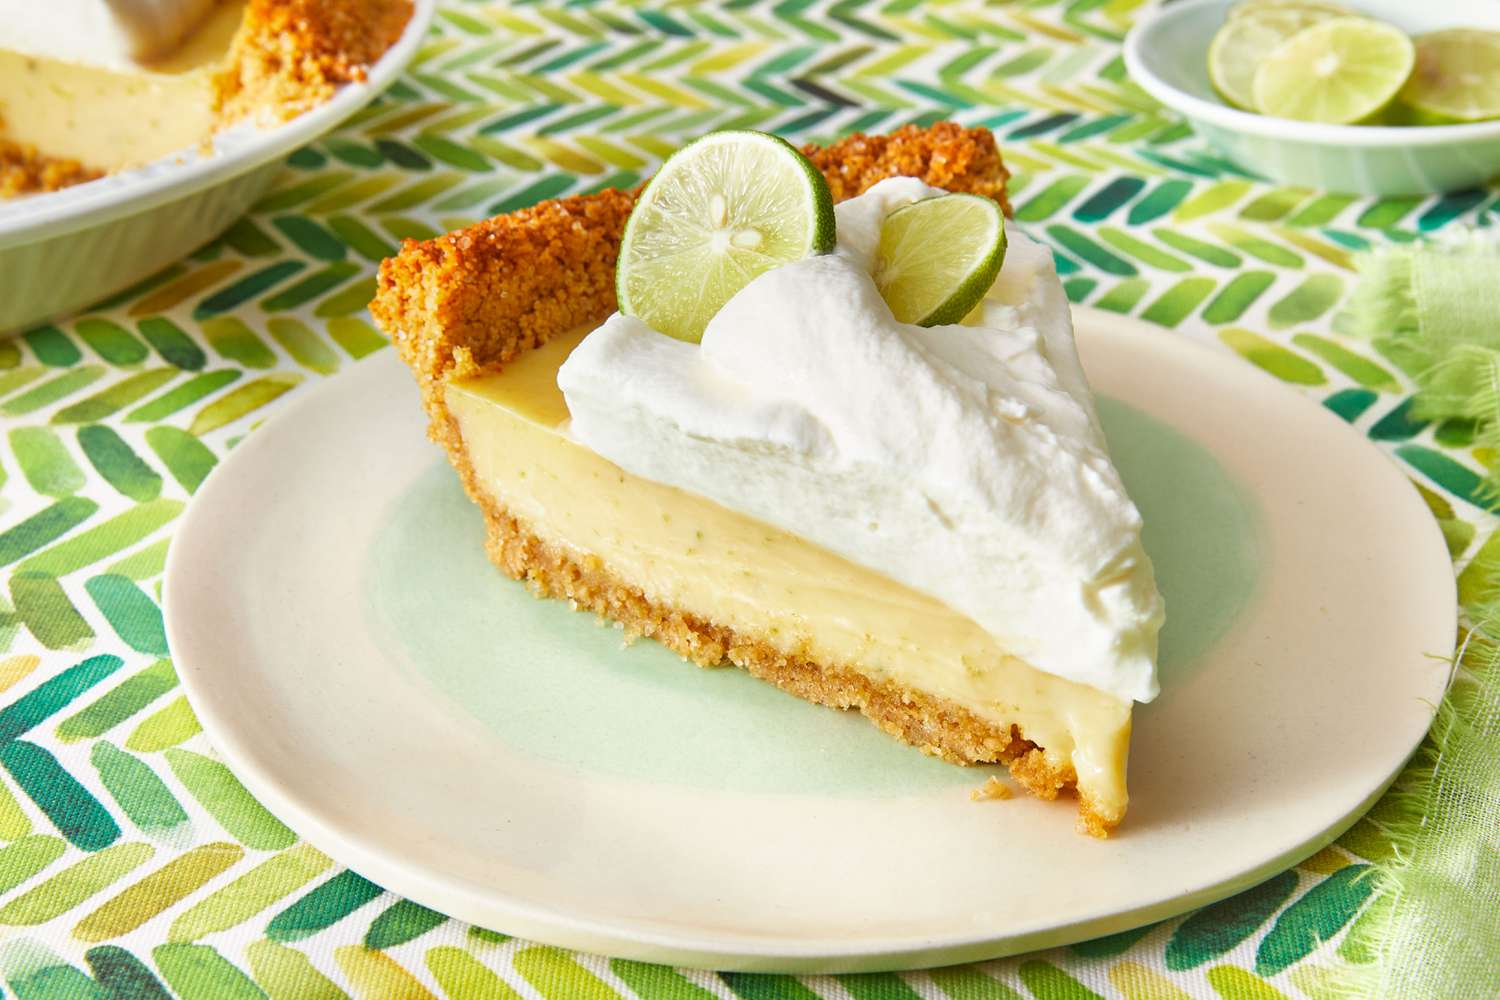 How To Store Key Lime Pie